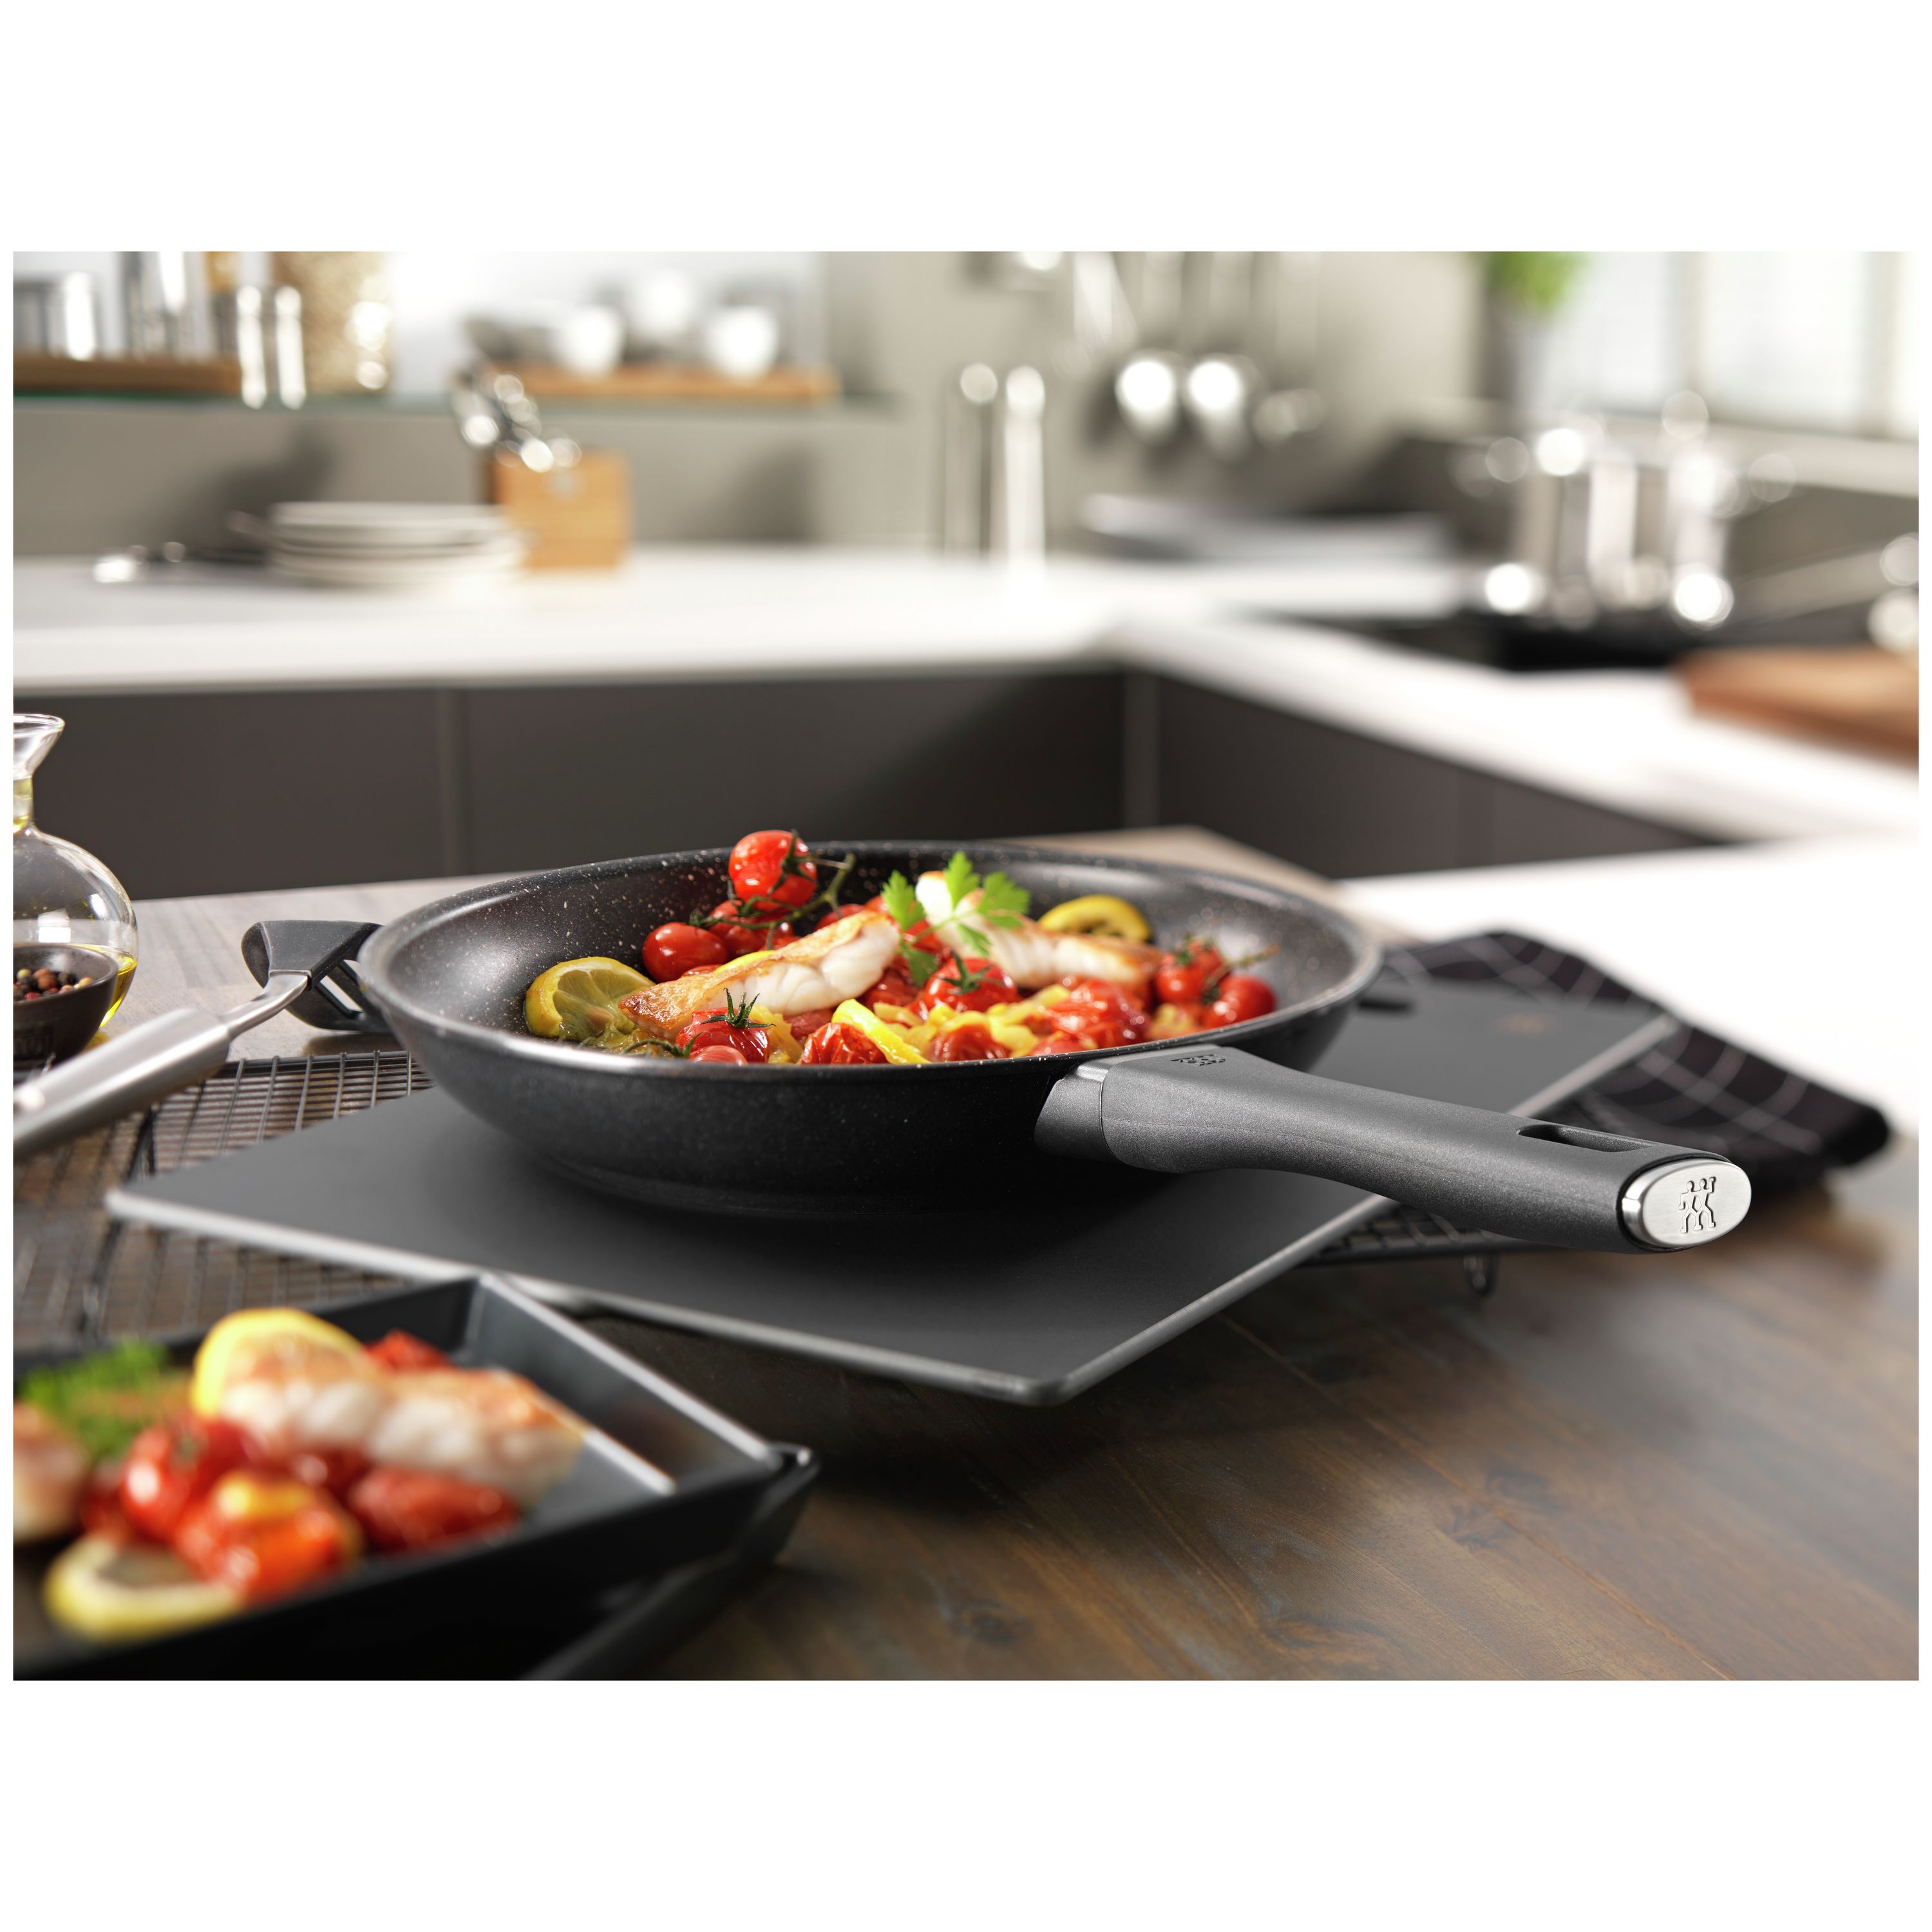  COOKLOVER Non-stick induction cookware set -pack -15-Black &  9.5 inch Non-stick induction stir fry pan with cooking utensils: Home &  Kitchen